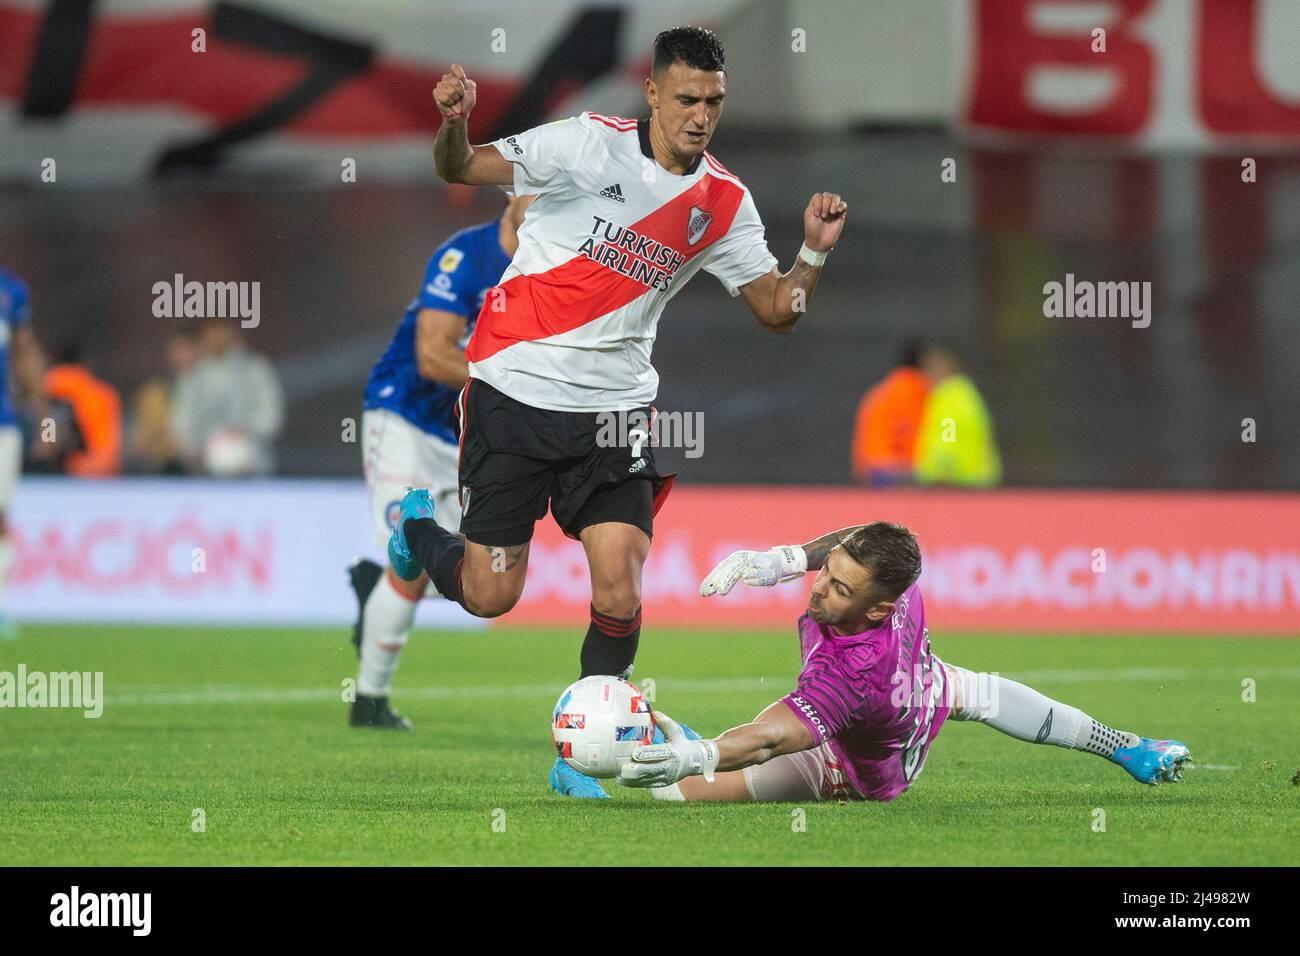 BUENOS AIRES, ARGENTINA - APRIL 3: Matias Suarez of River Plate fight for the ball with Federico Lanzillotta of Argentinos Juniors during a Copa de la Stock Photo